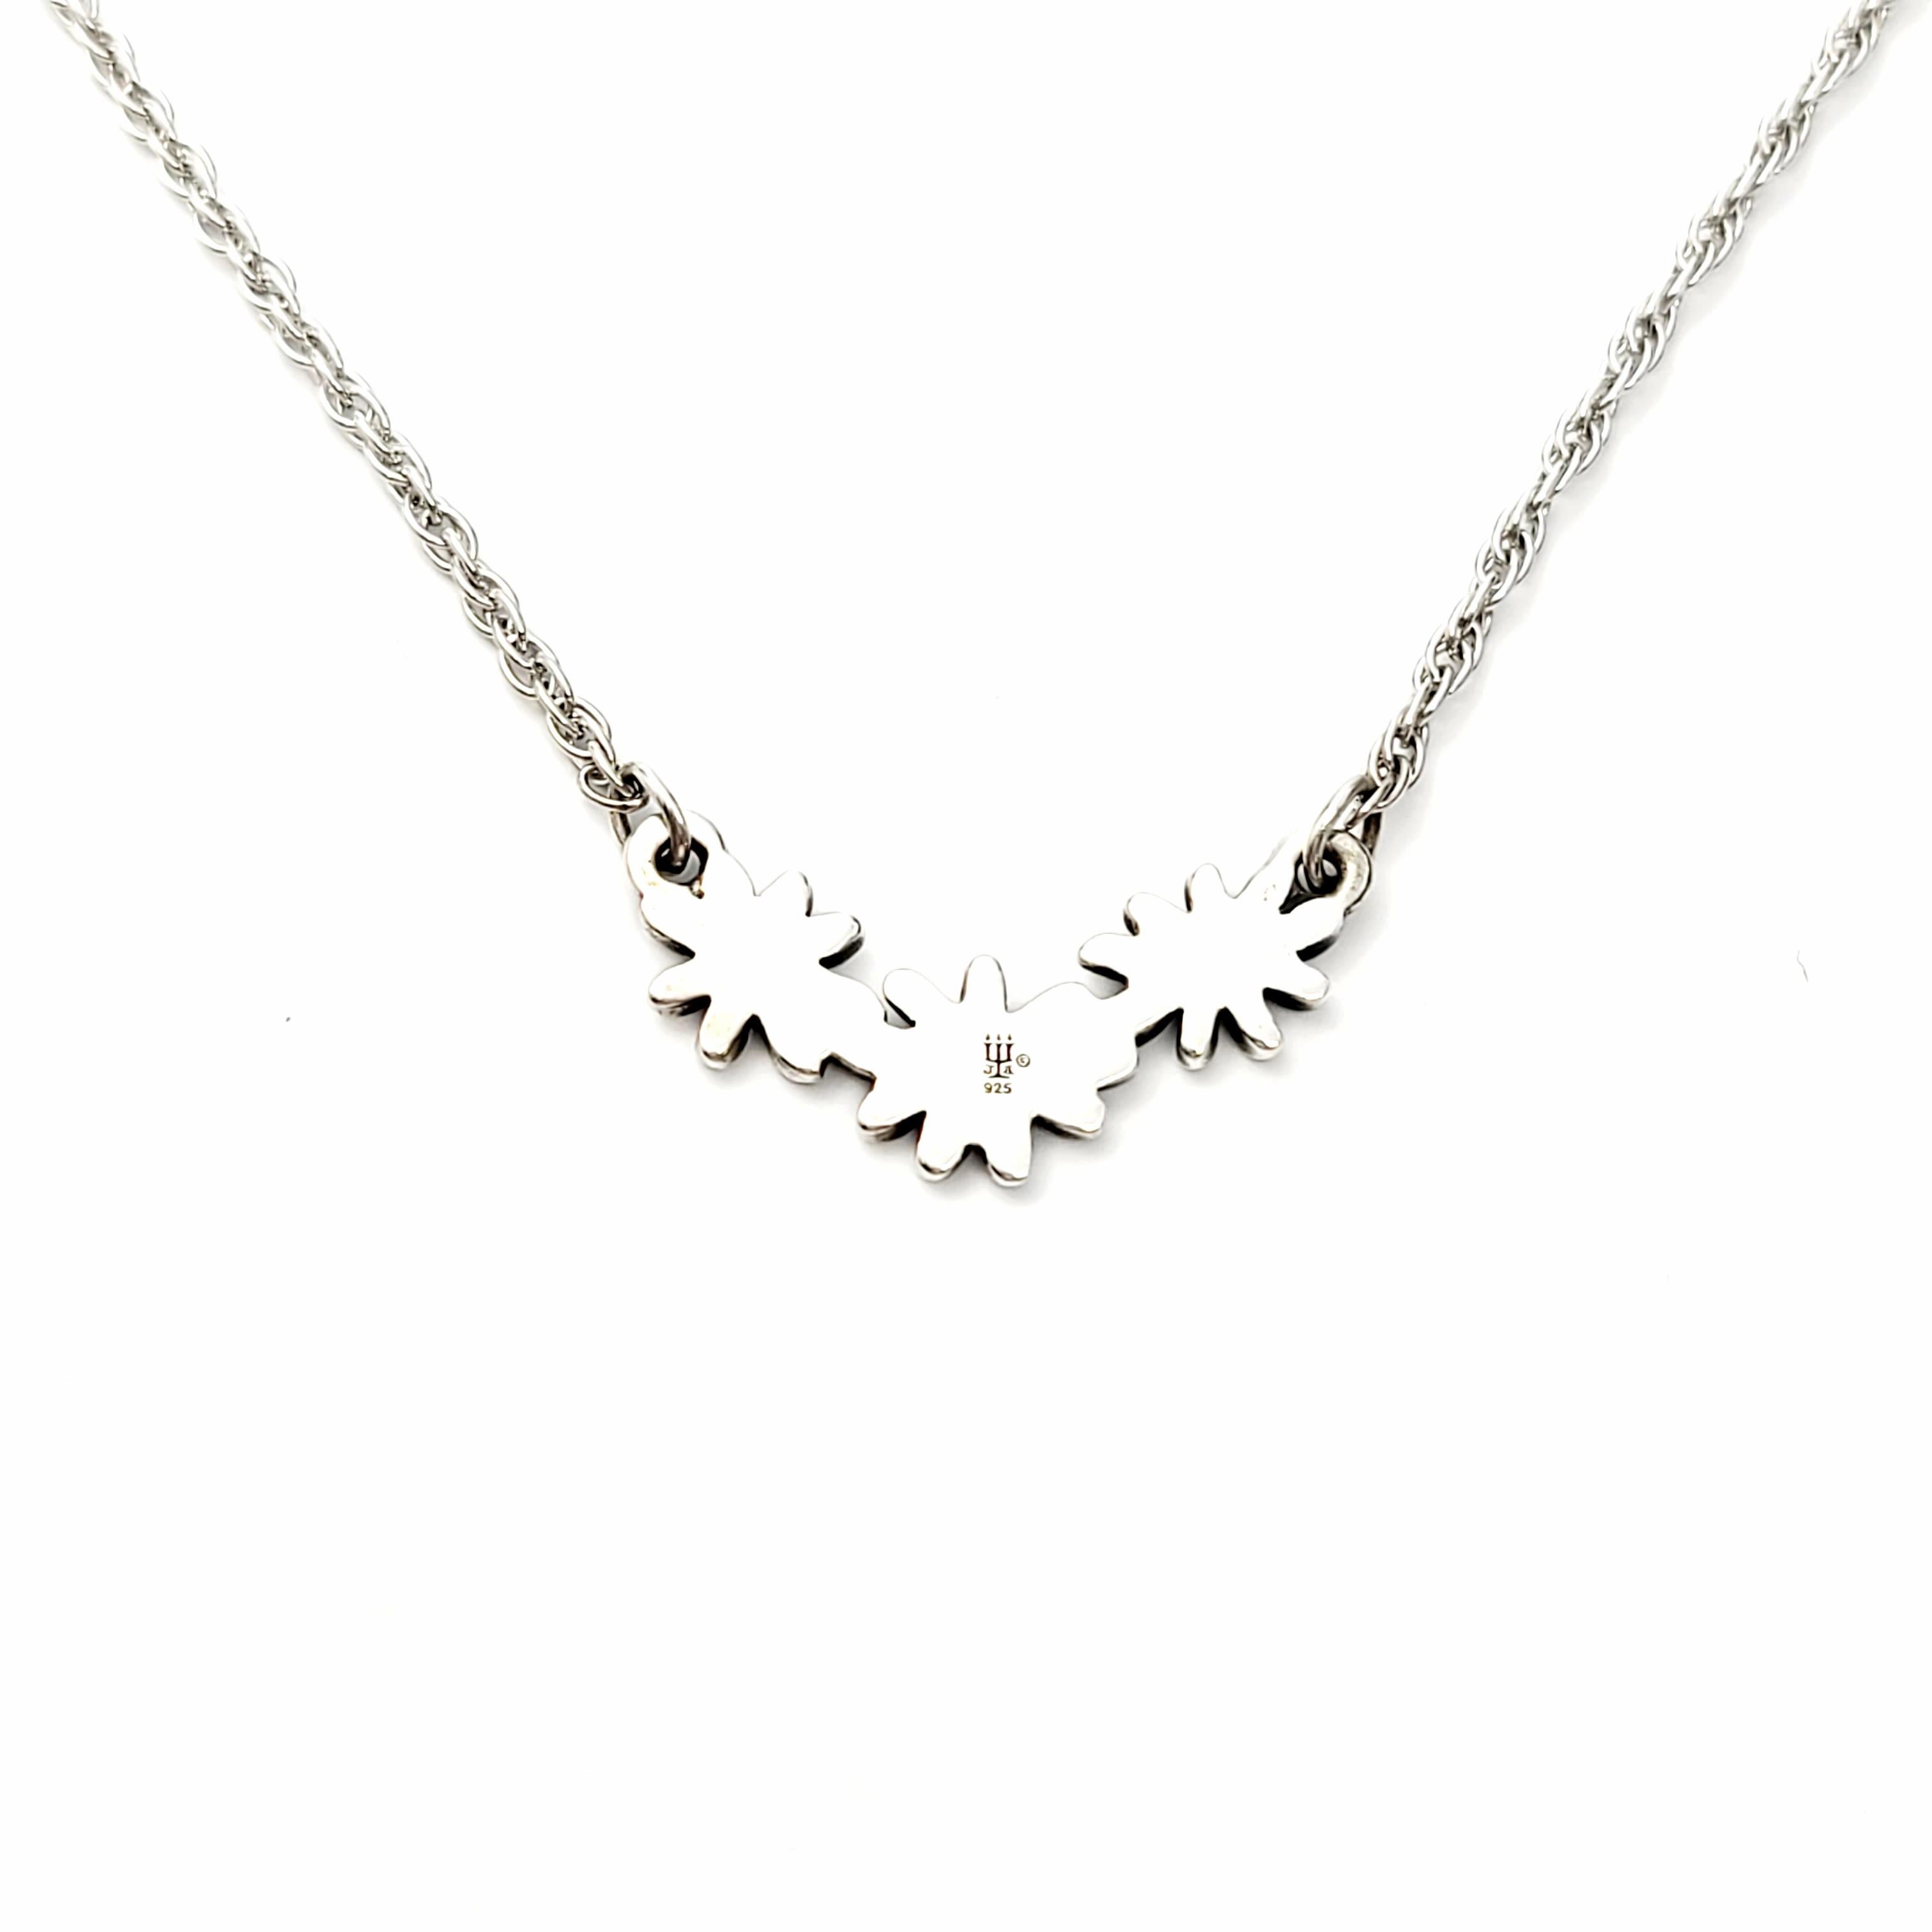 Retired James Avery sterling silver Margarita daisy necklace.

Sweet and delicate necklace featuring three daisies on a chain necklace.

Measures 16